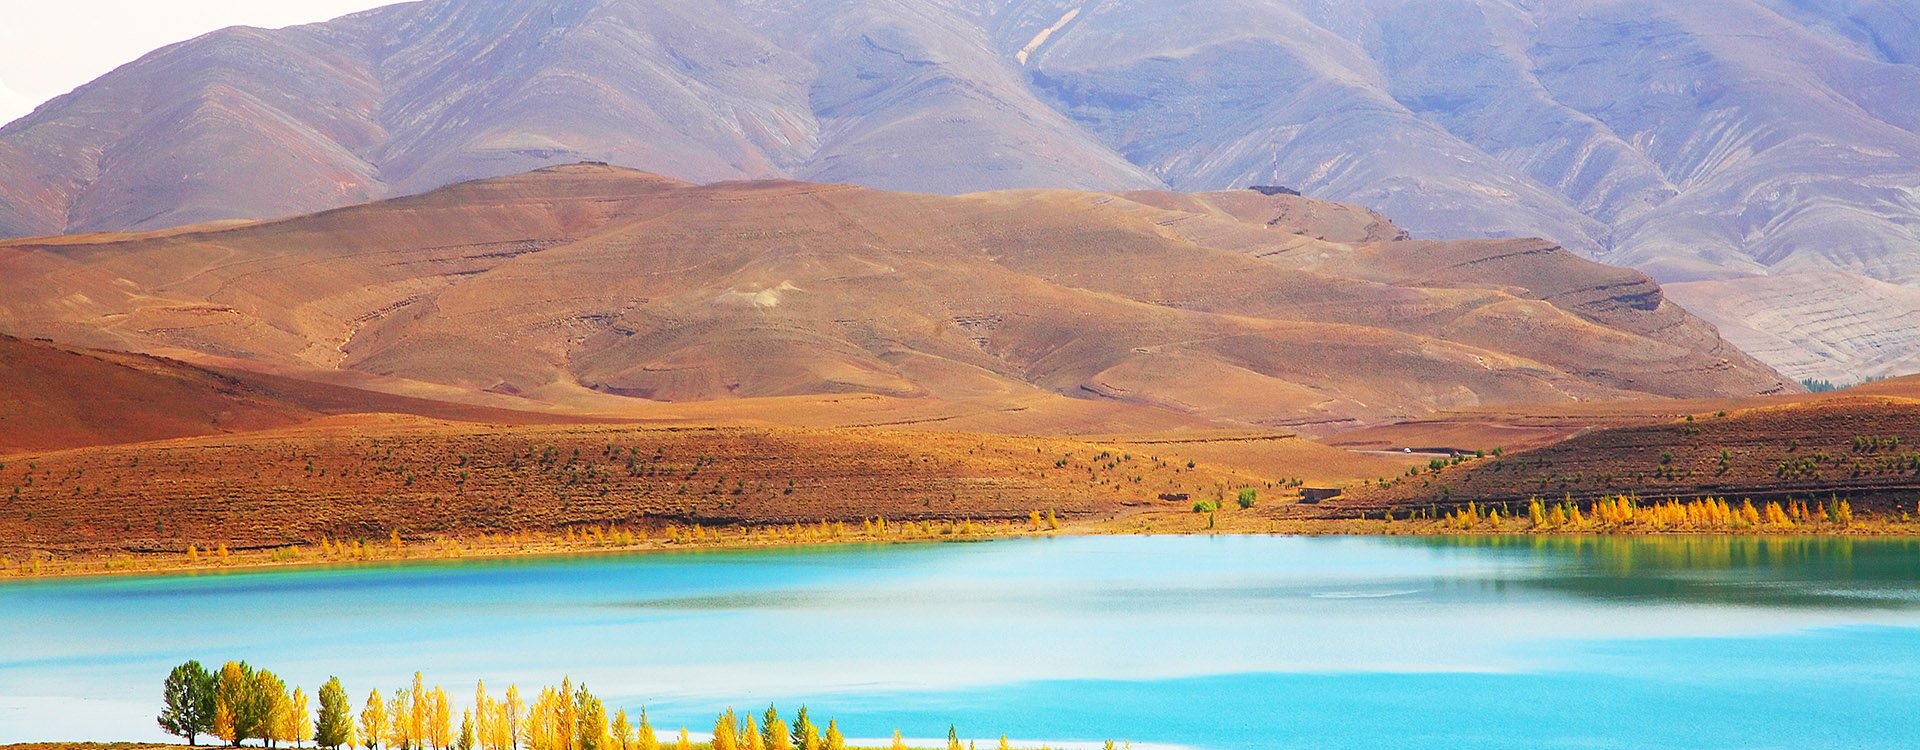 Lake in Atlas Mountains, Morocco, Africa